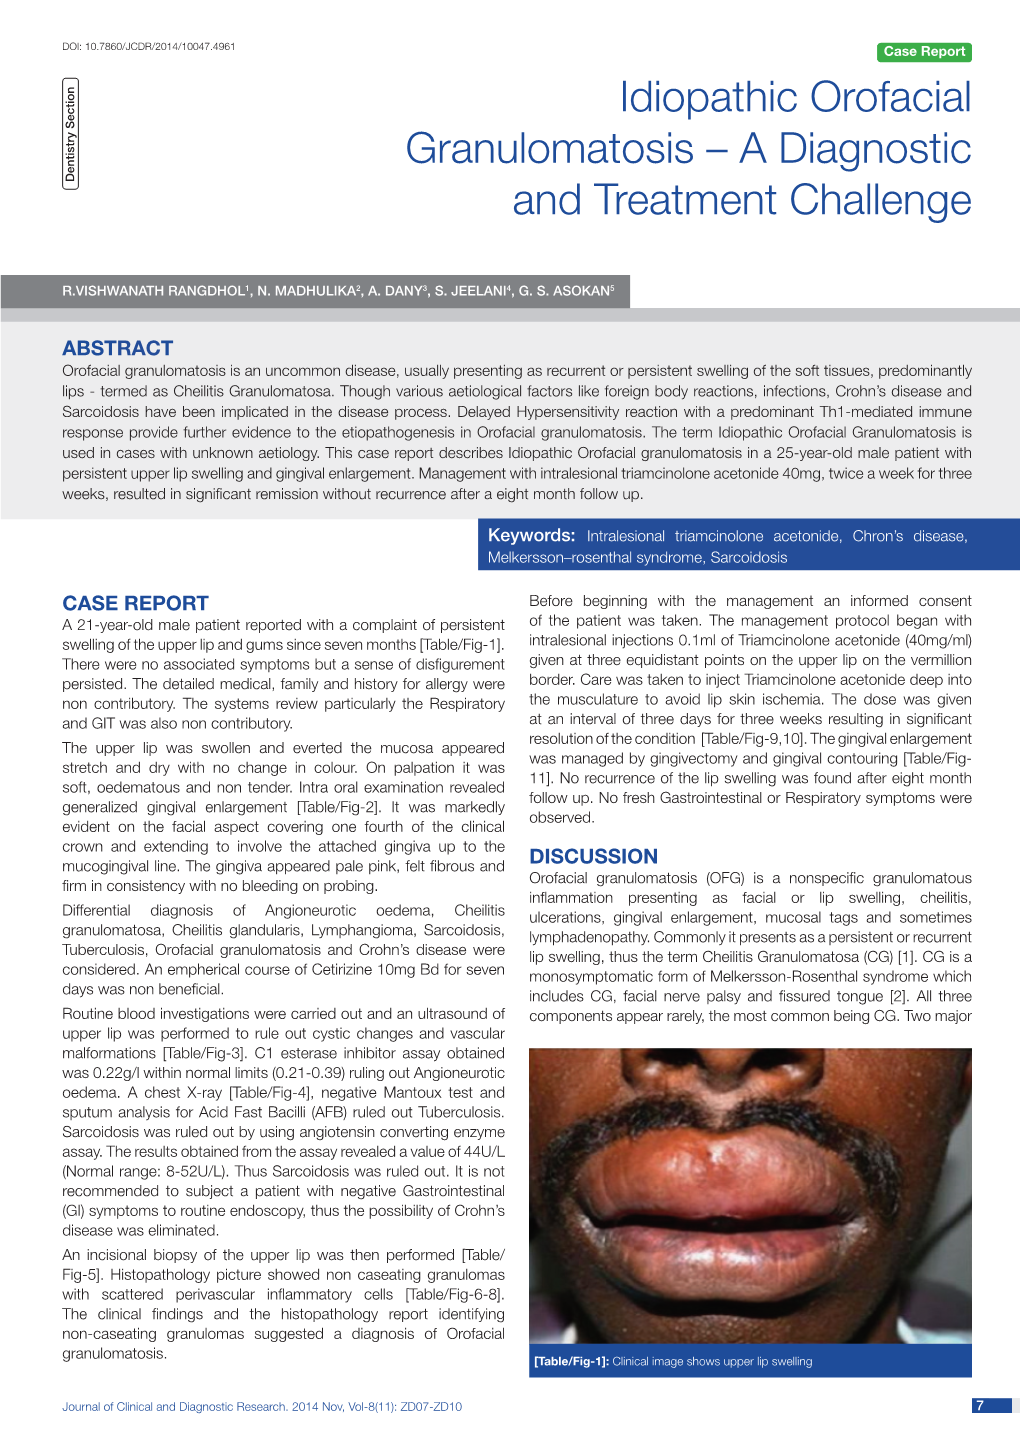 Idiopathic Orofacial Granulomatosis – a Diagnostic D Entistry S Ection and Treatment Challenge